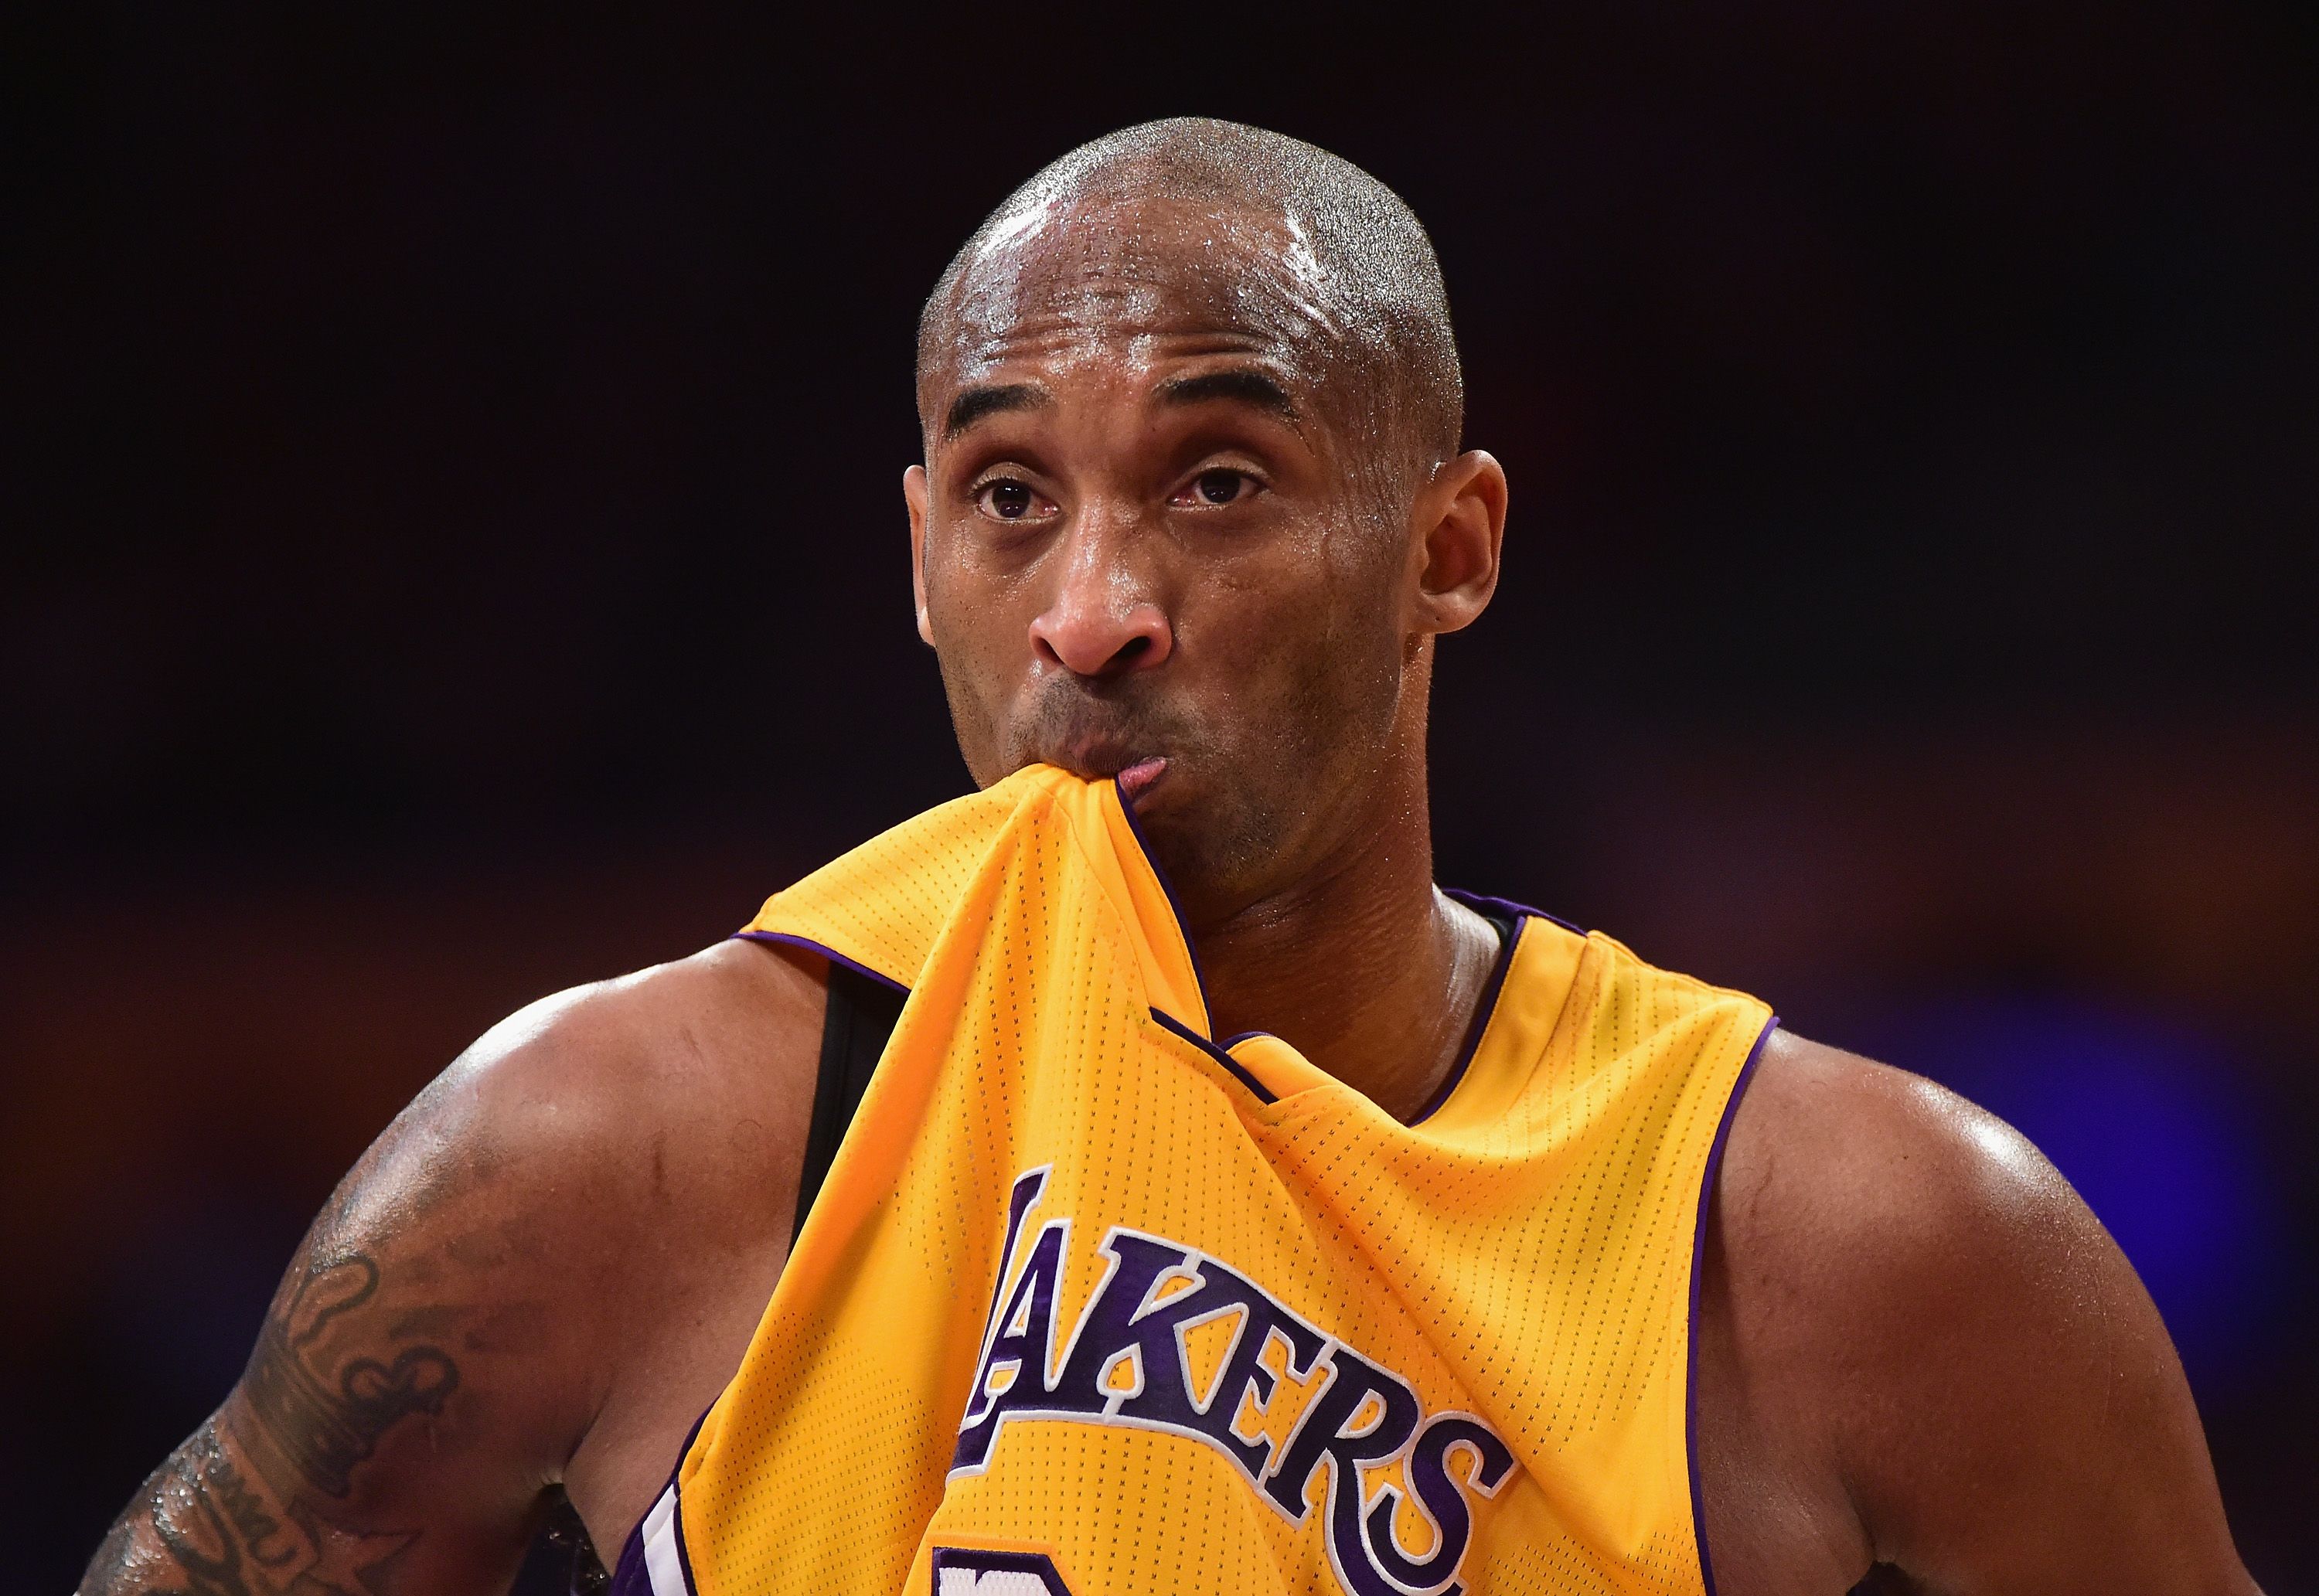 Kobe Bryant during the first half against the Houston Rockets on December 17, 2015 in Los Angeles. | Photo: Getty Images